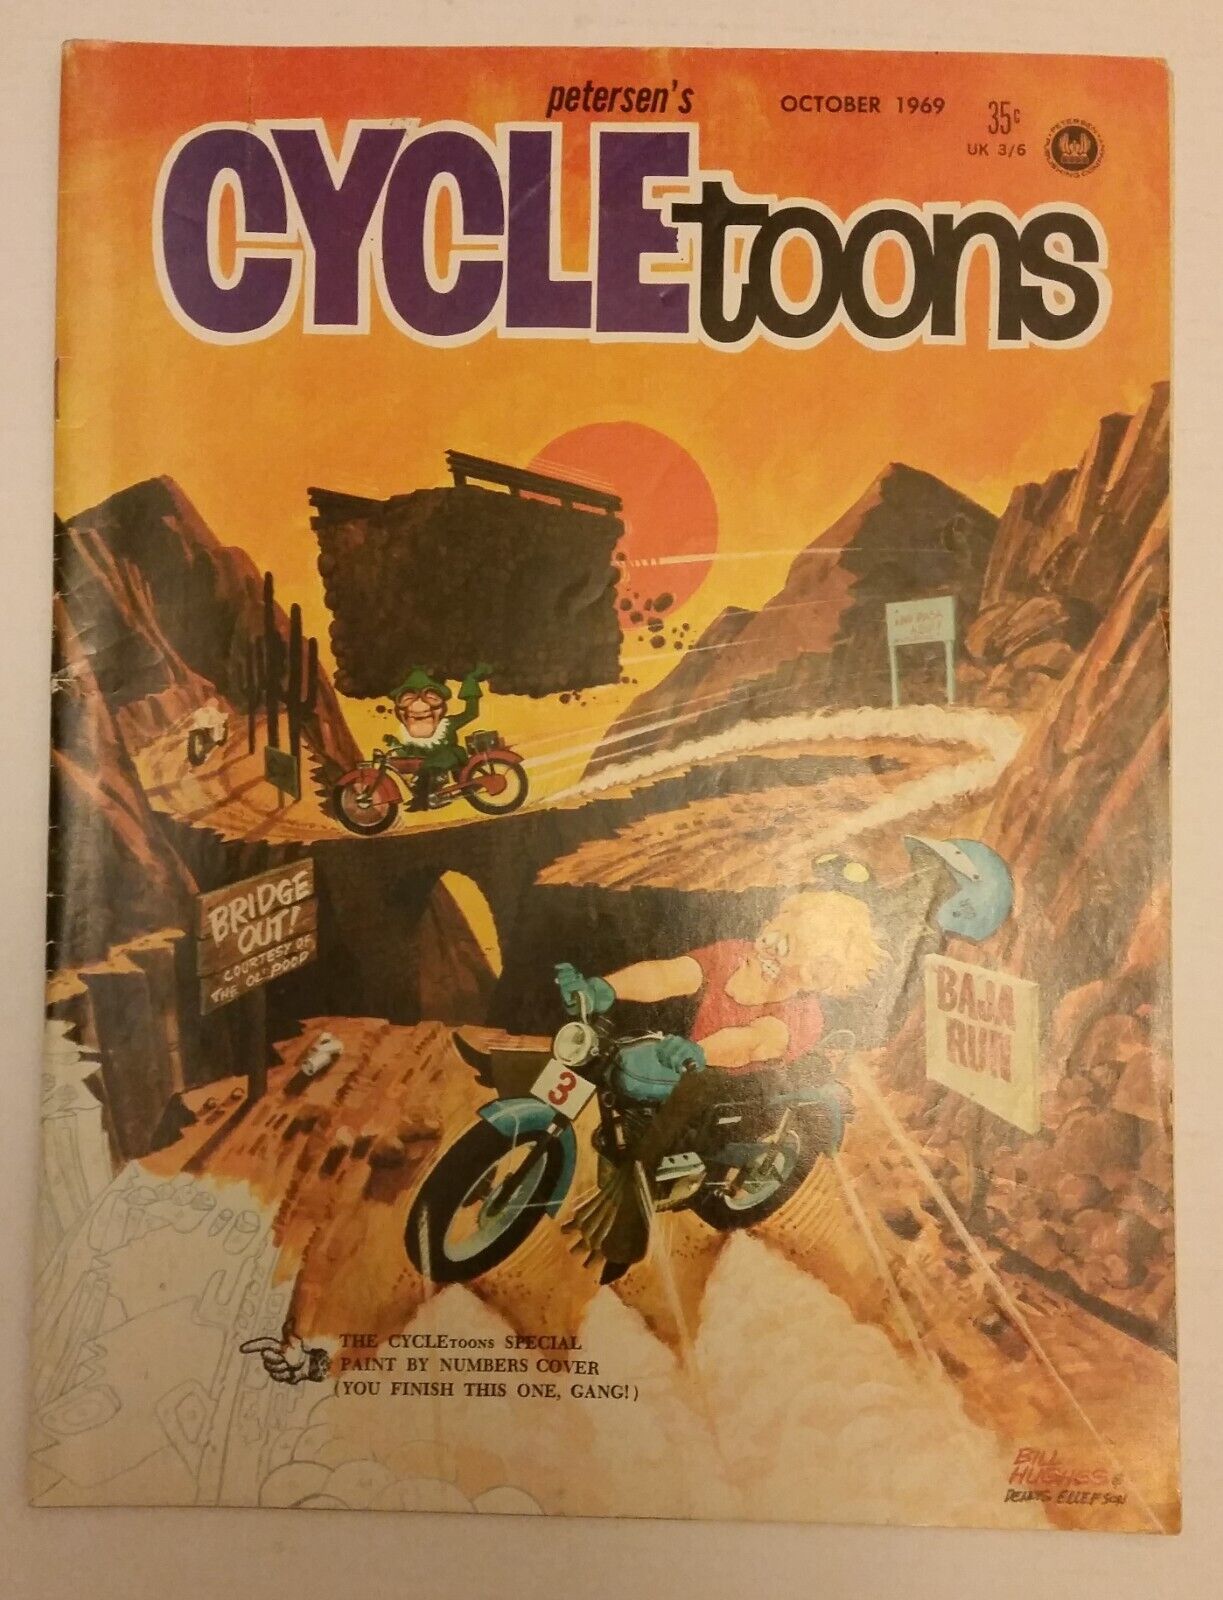 Vintage Cycletoons Oct 1969 VG to Like New cond. Bill Hughes cover art.